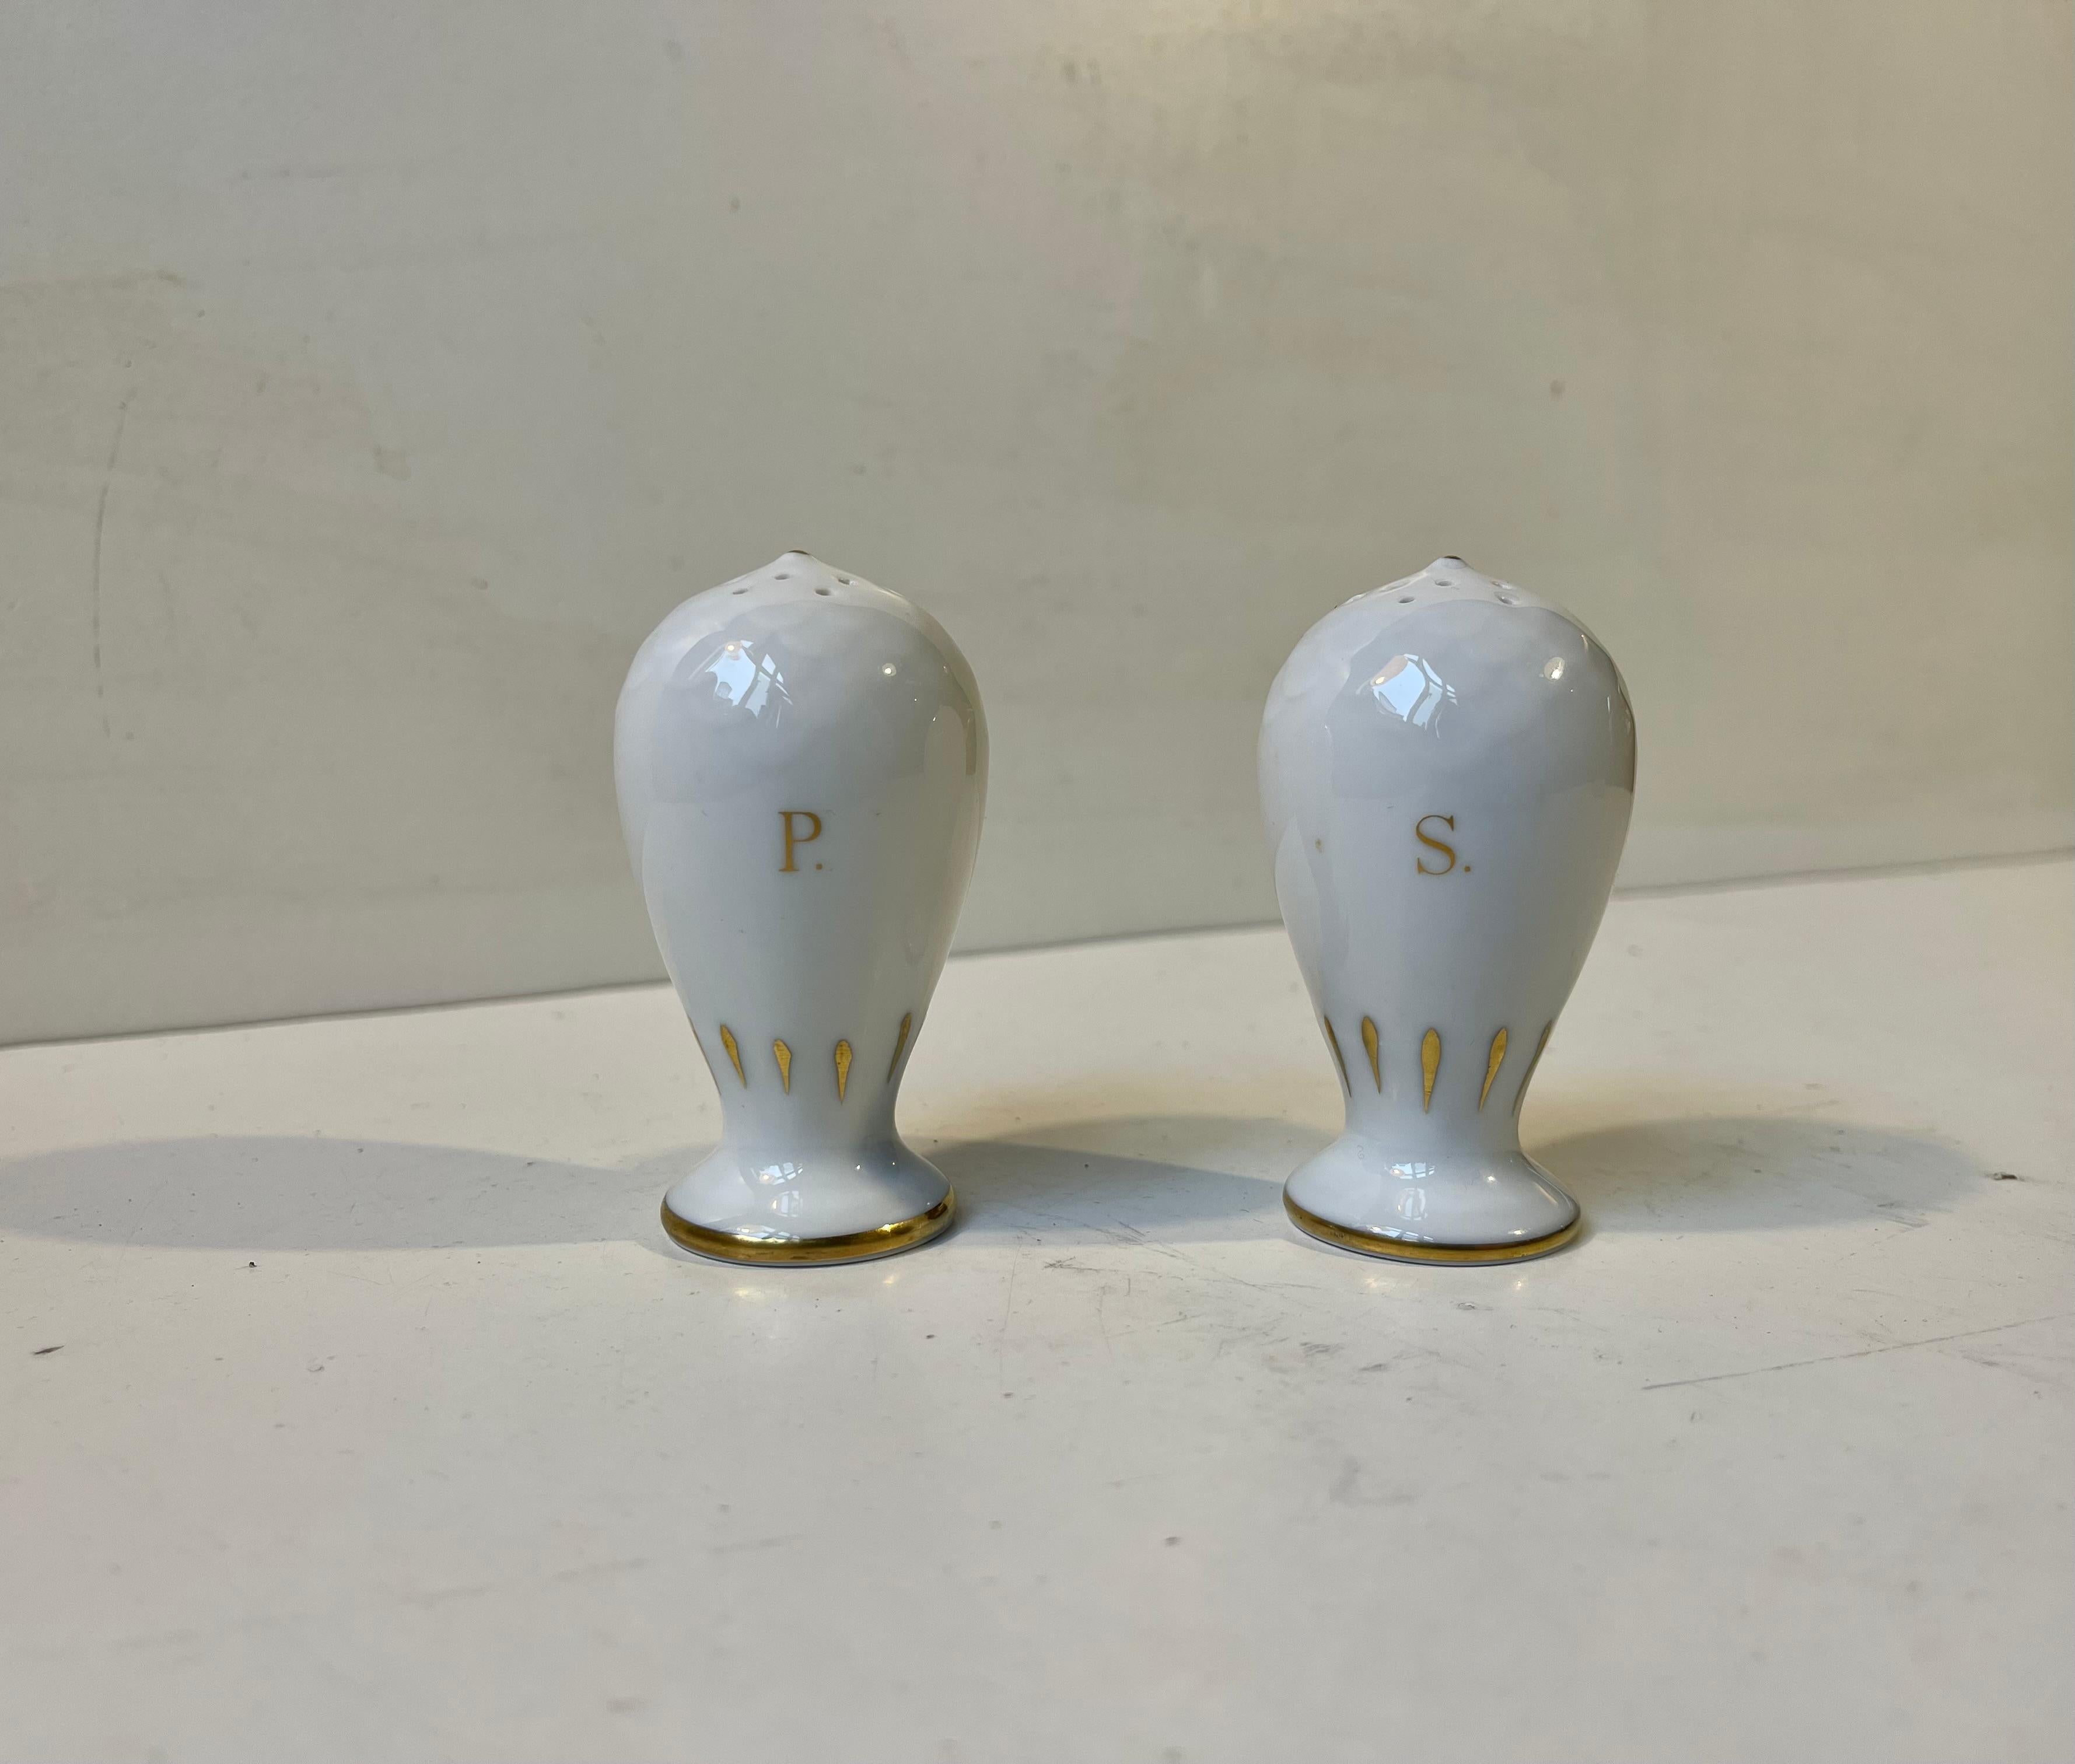 Mid-Century Modern Porcelain Salt and Pepper shakers with Hand-Painted Errants by Bing & Grondahl  For Sale